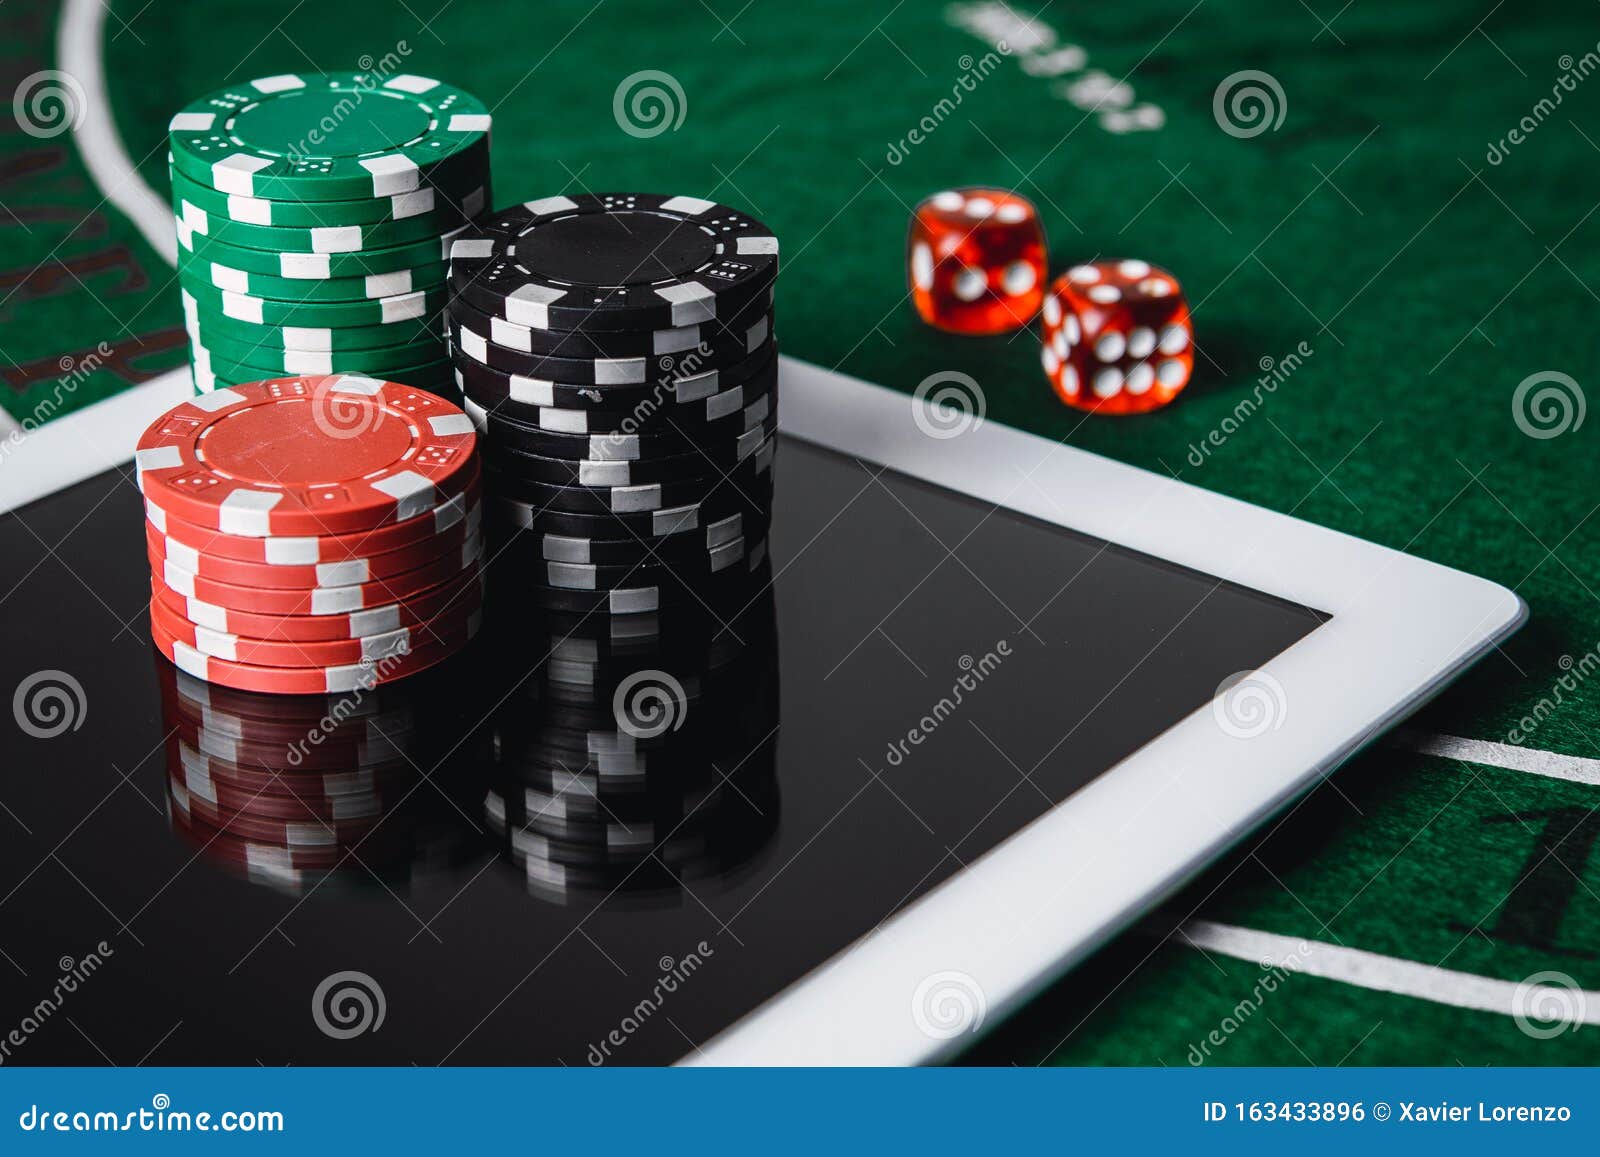 5 Easy Ways You Can Turn online casino Into Success